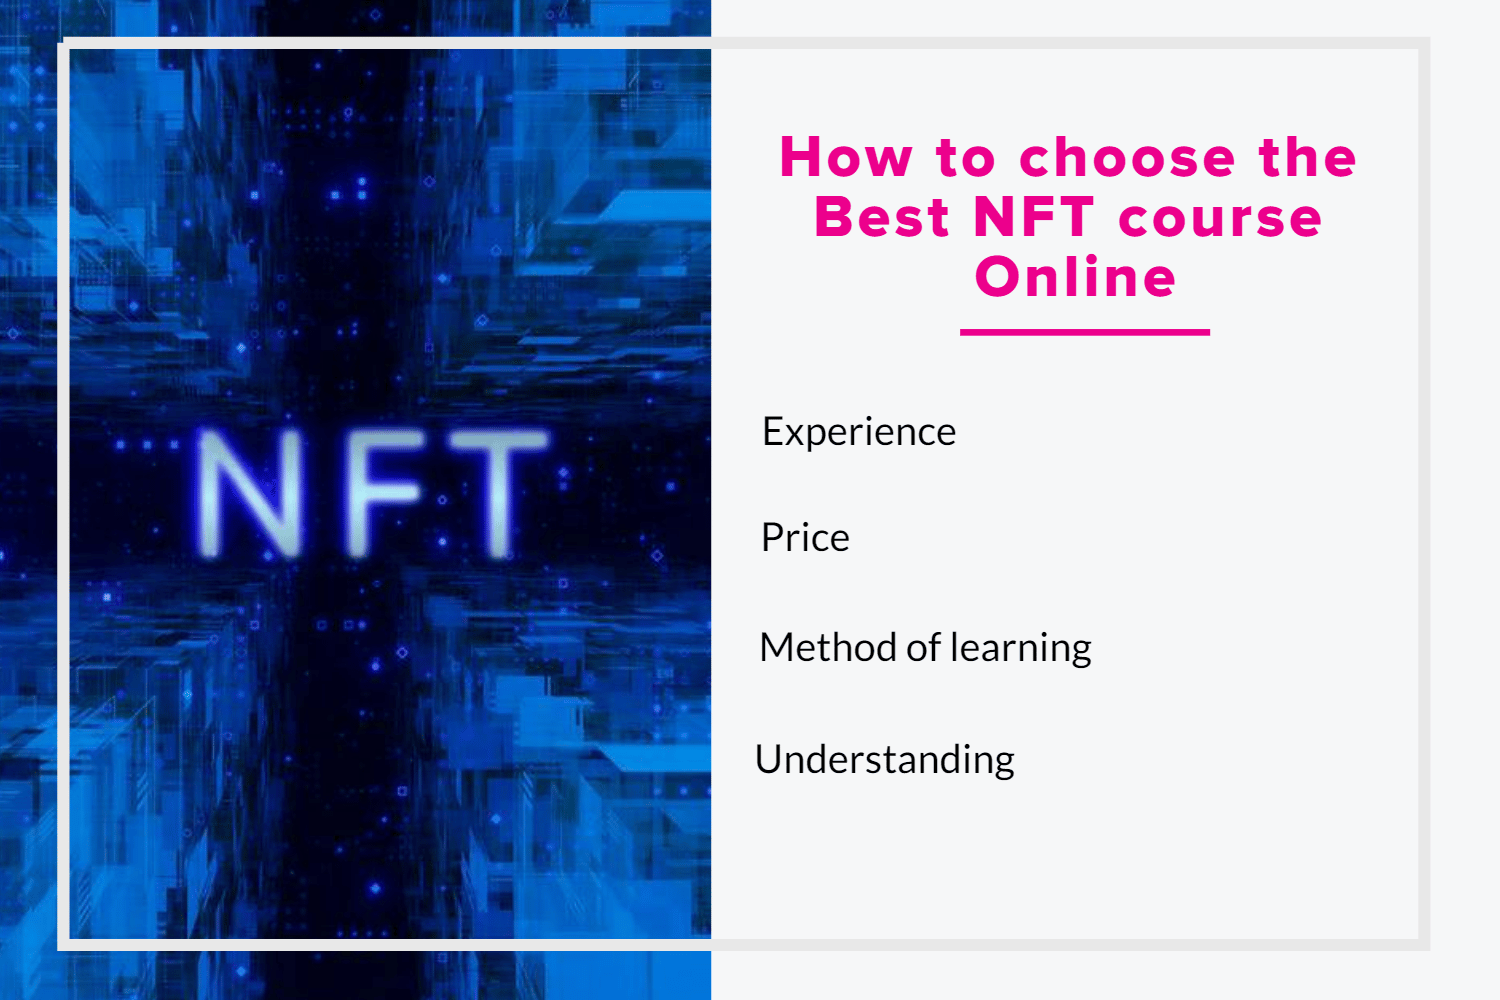 How to choose the Best NFT course Online